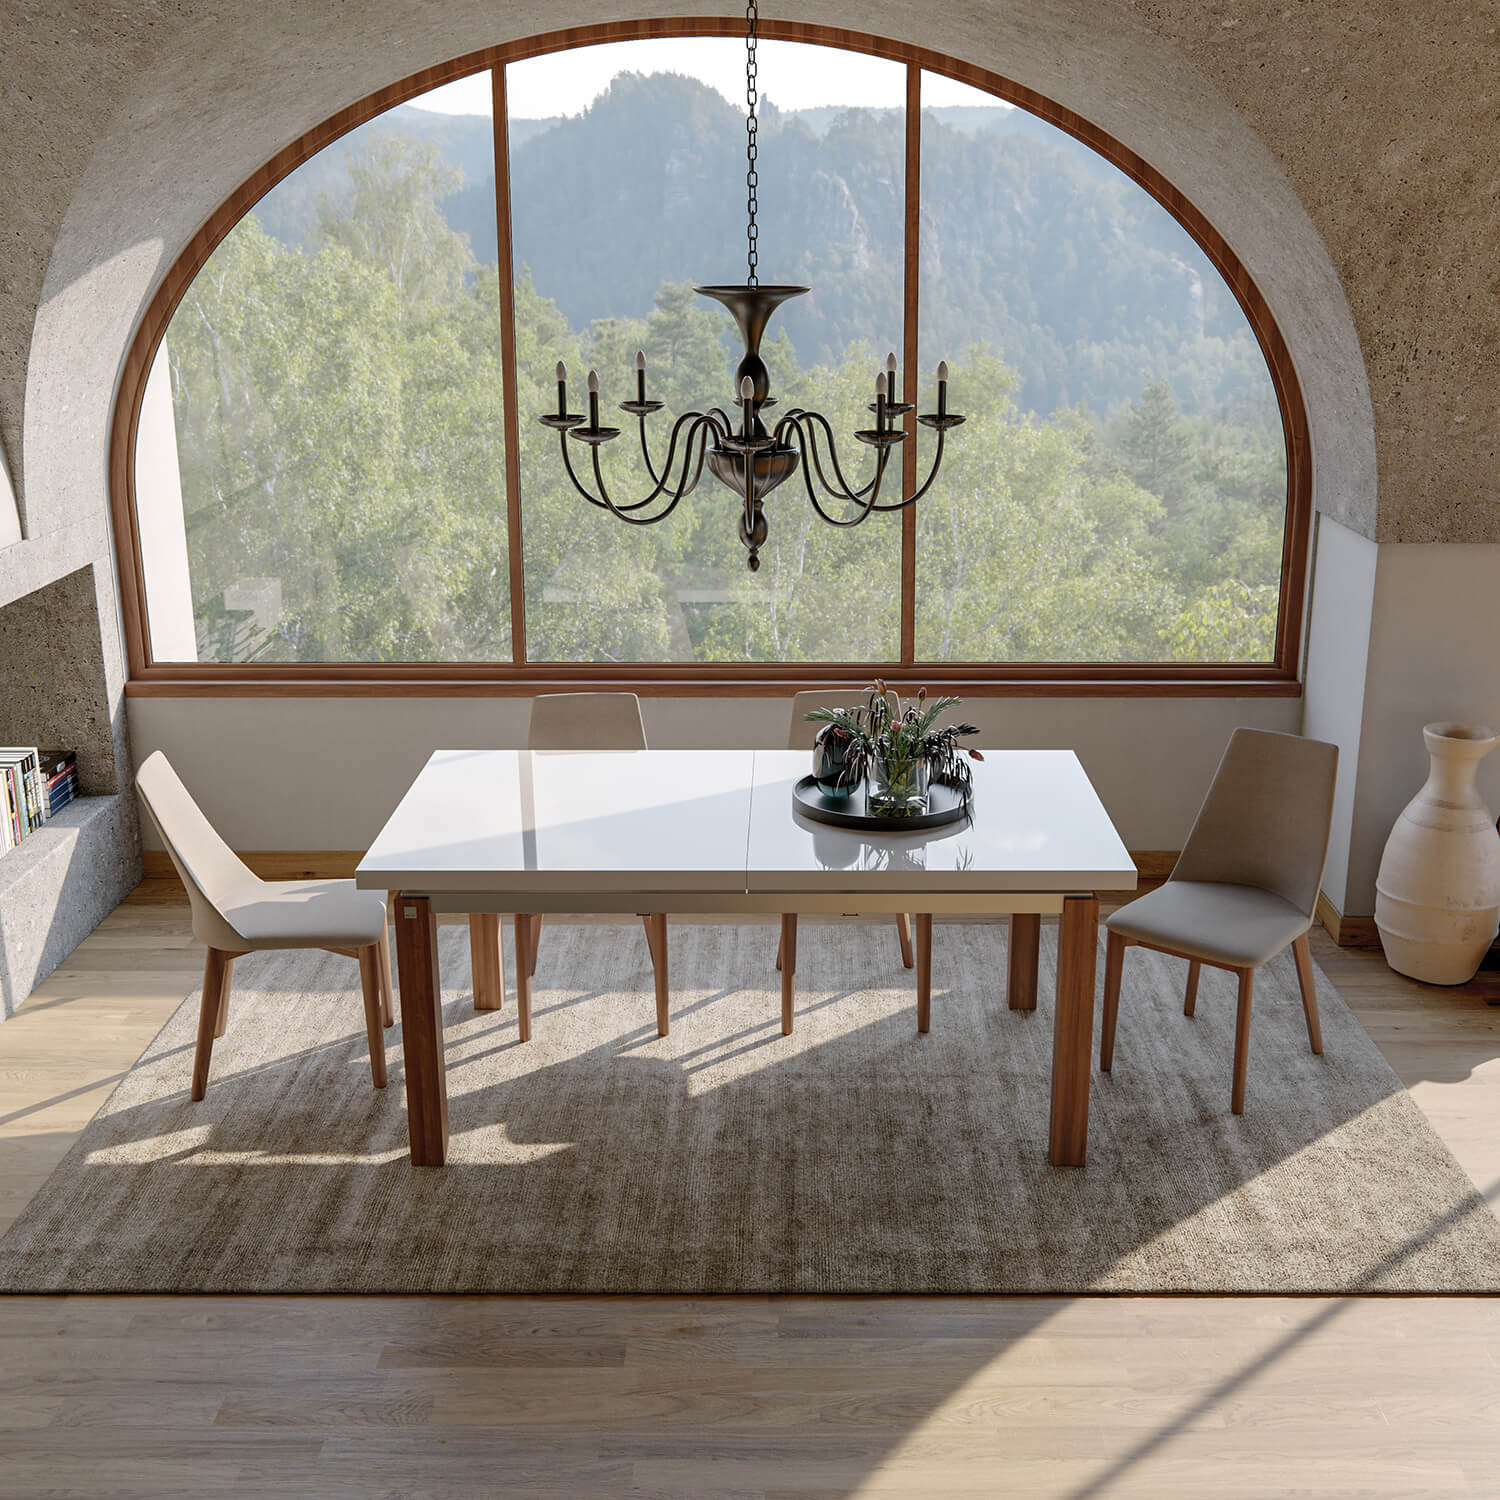 Morlupo dining table - exhibit